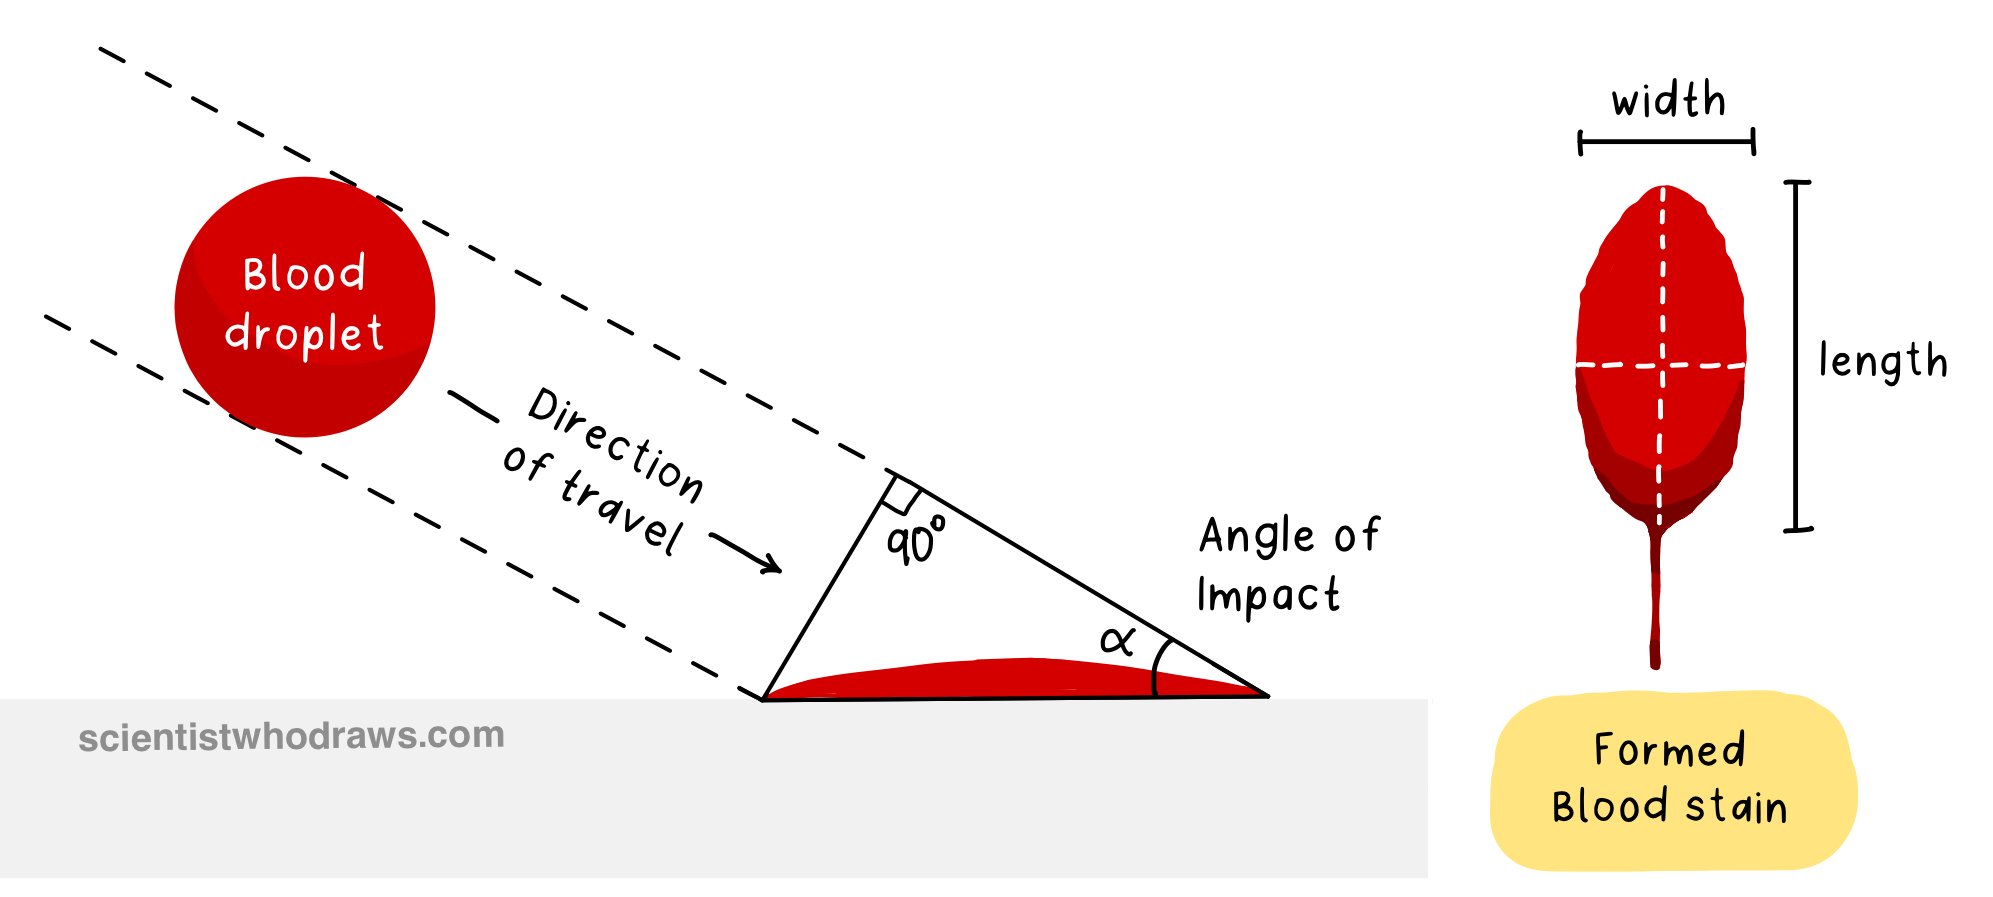 This image explains how blood droplet falls on the ground and how to calculate the angle of impact for blood spatter analysis